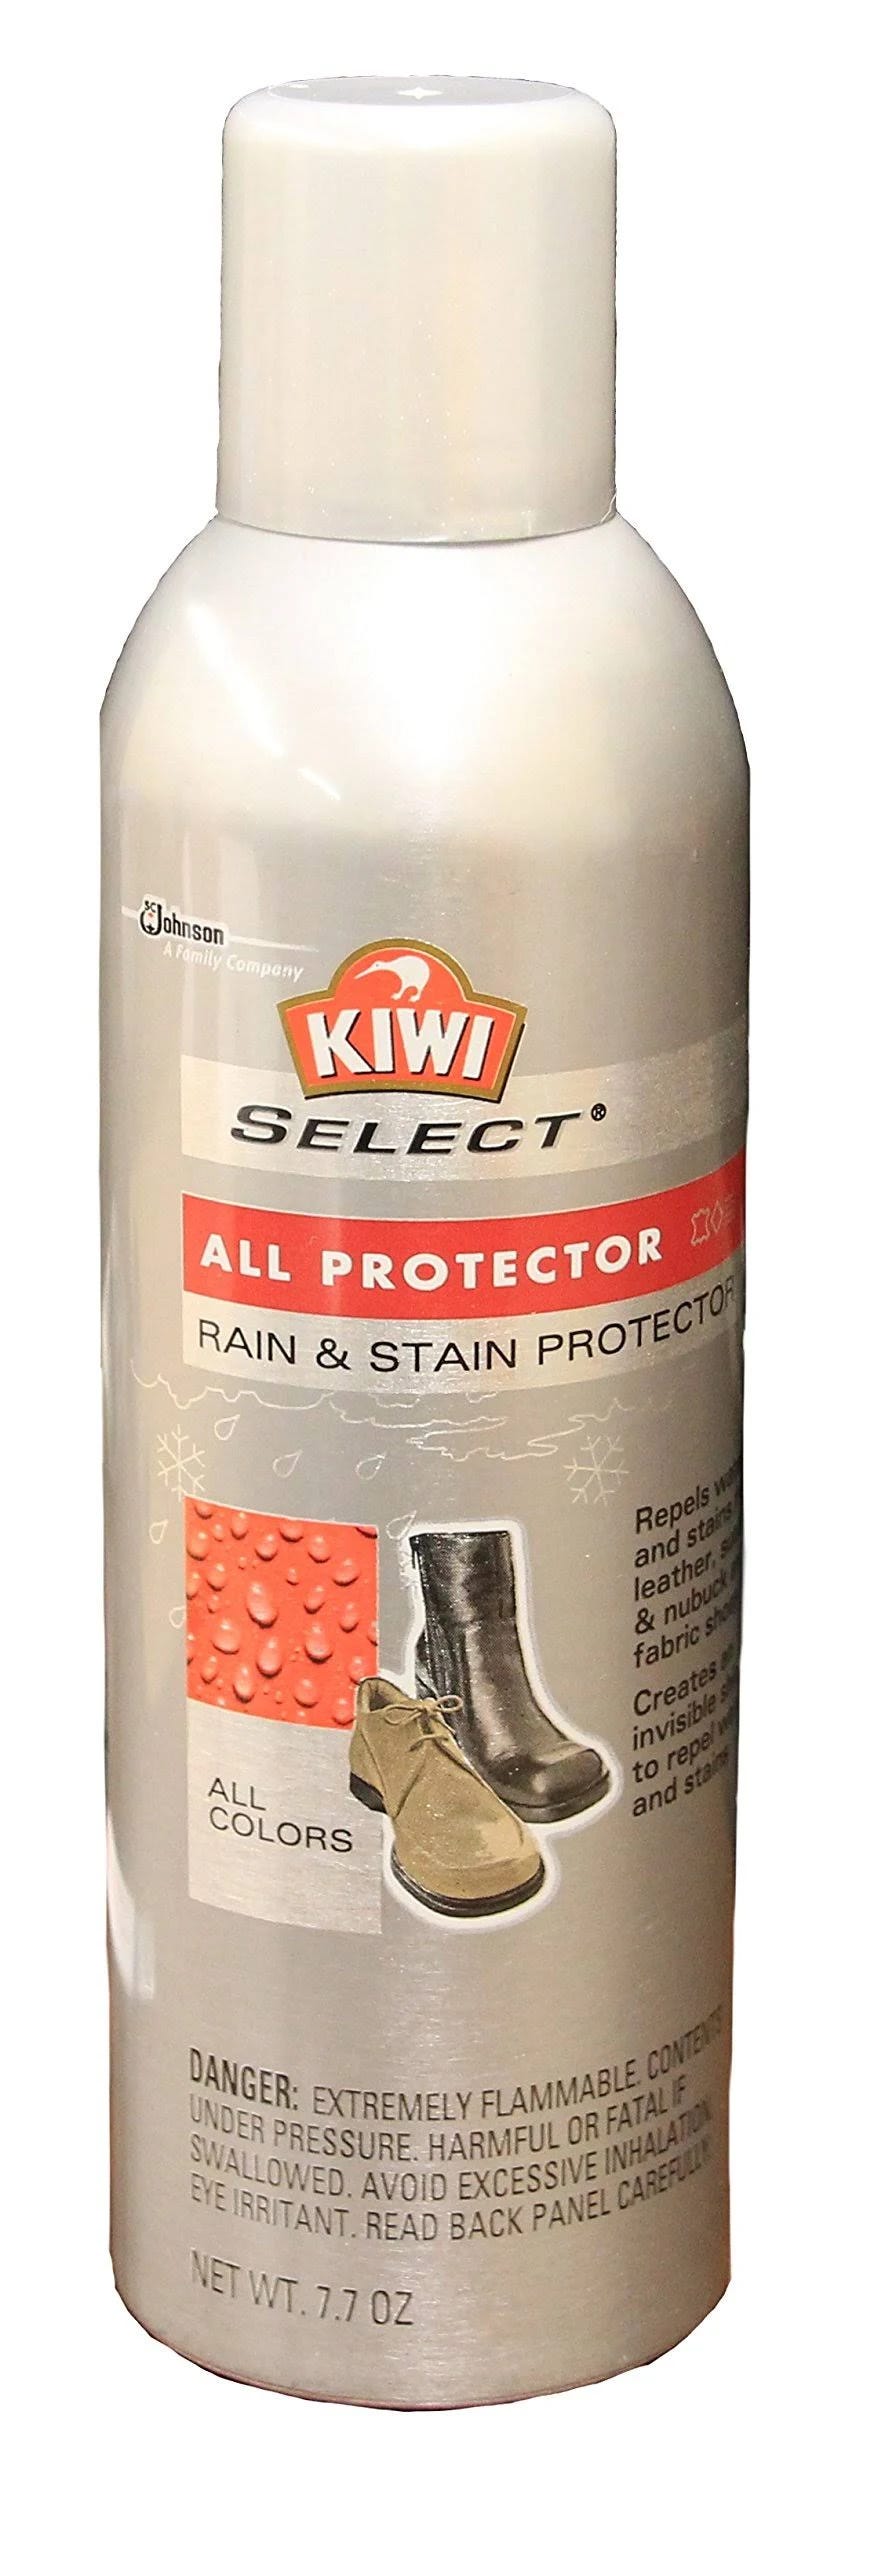 Prolong Leather Life with All-Purpose Crep Protector Spray | Image